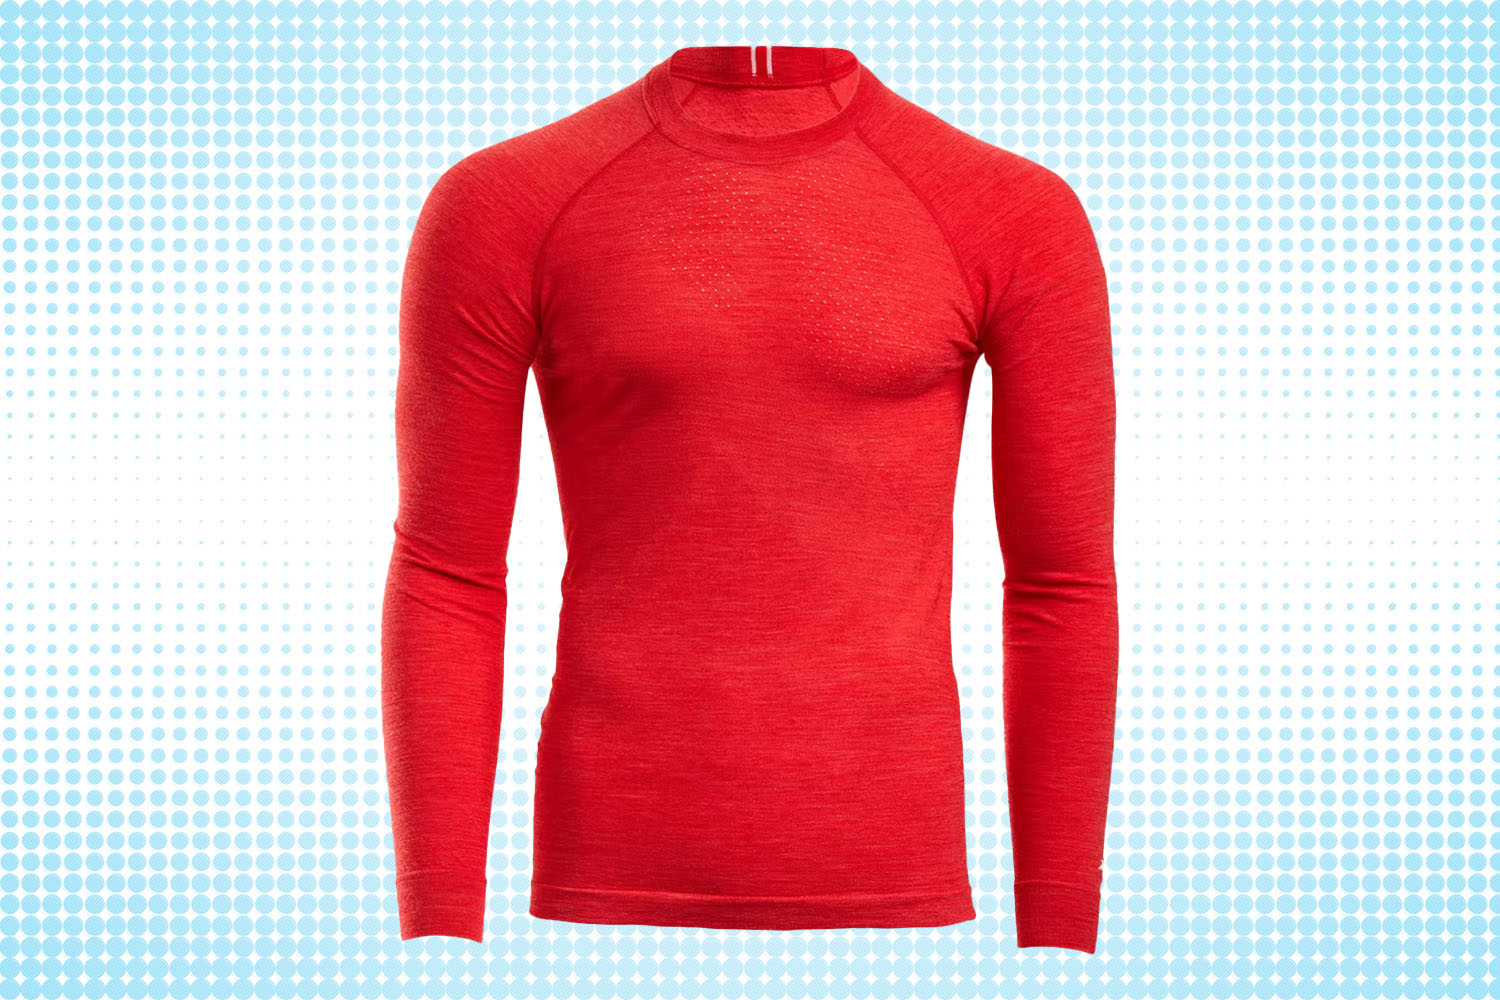 a bright red long sleeve base layer from Tracksmith on a white and blue dotted background